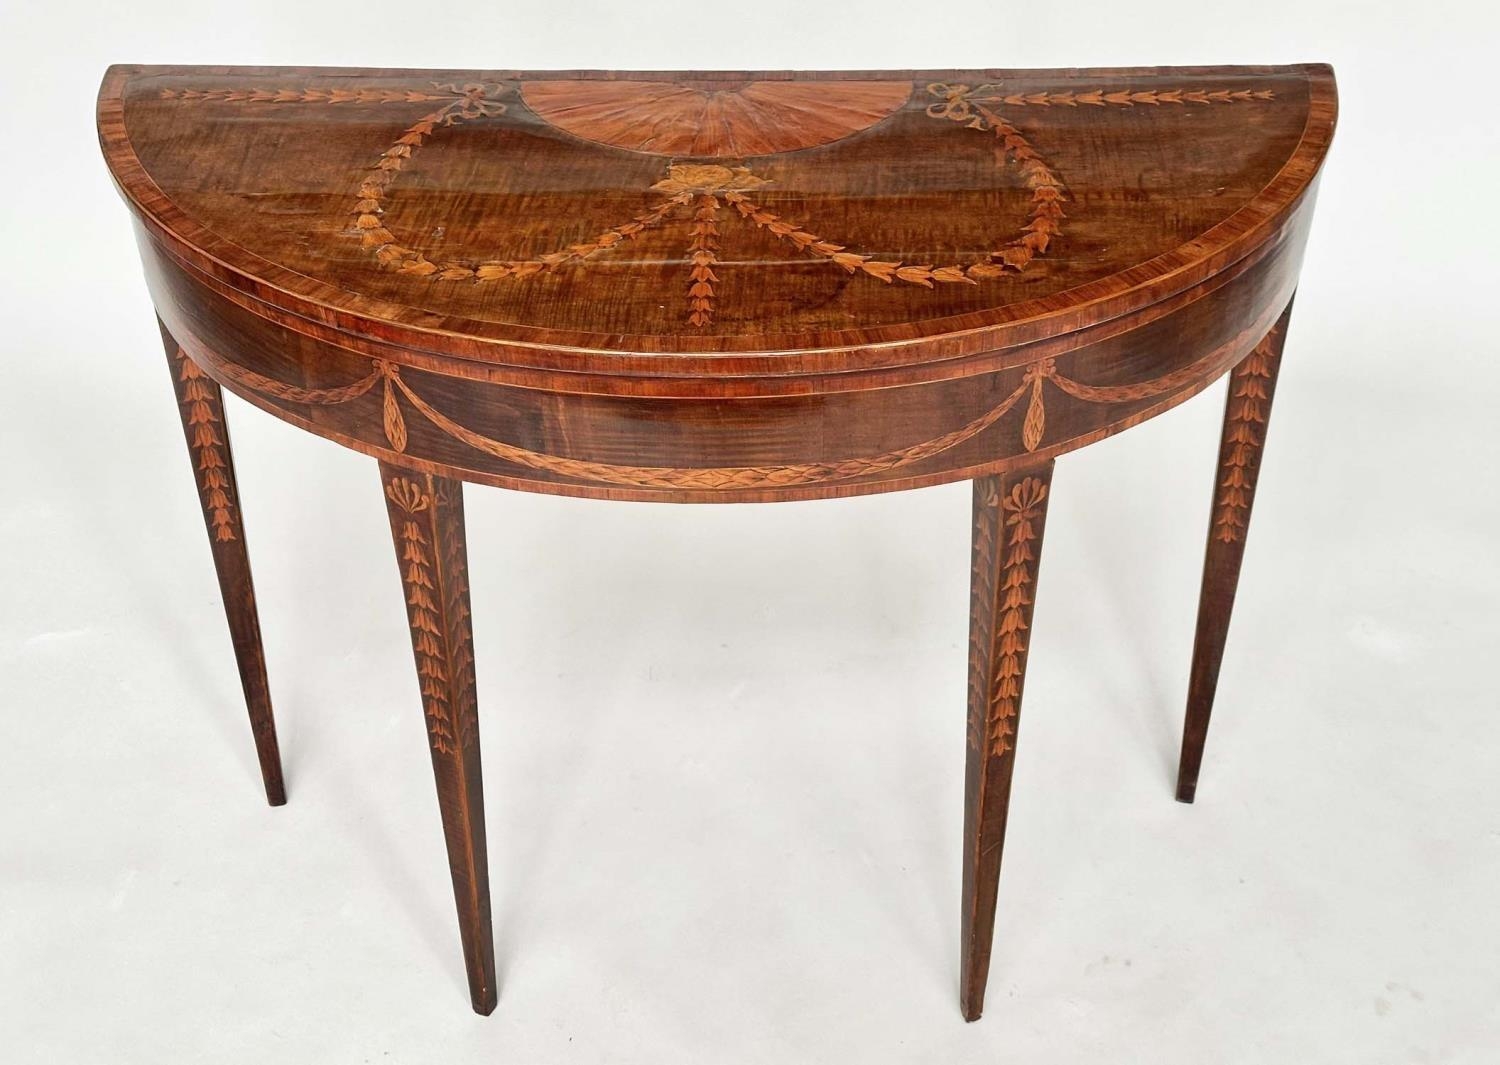 DEMI LUNE SIDE TABLE, George III, probably Irish, fiddle back mahogany and satinwood marquetry - Image 12 of 16